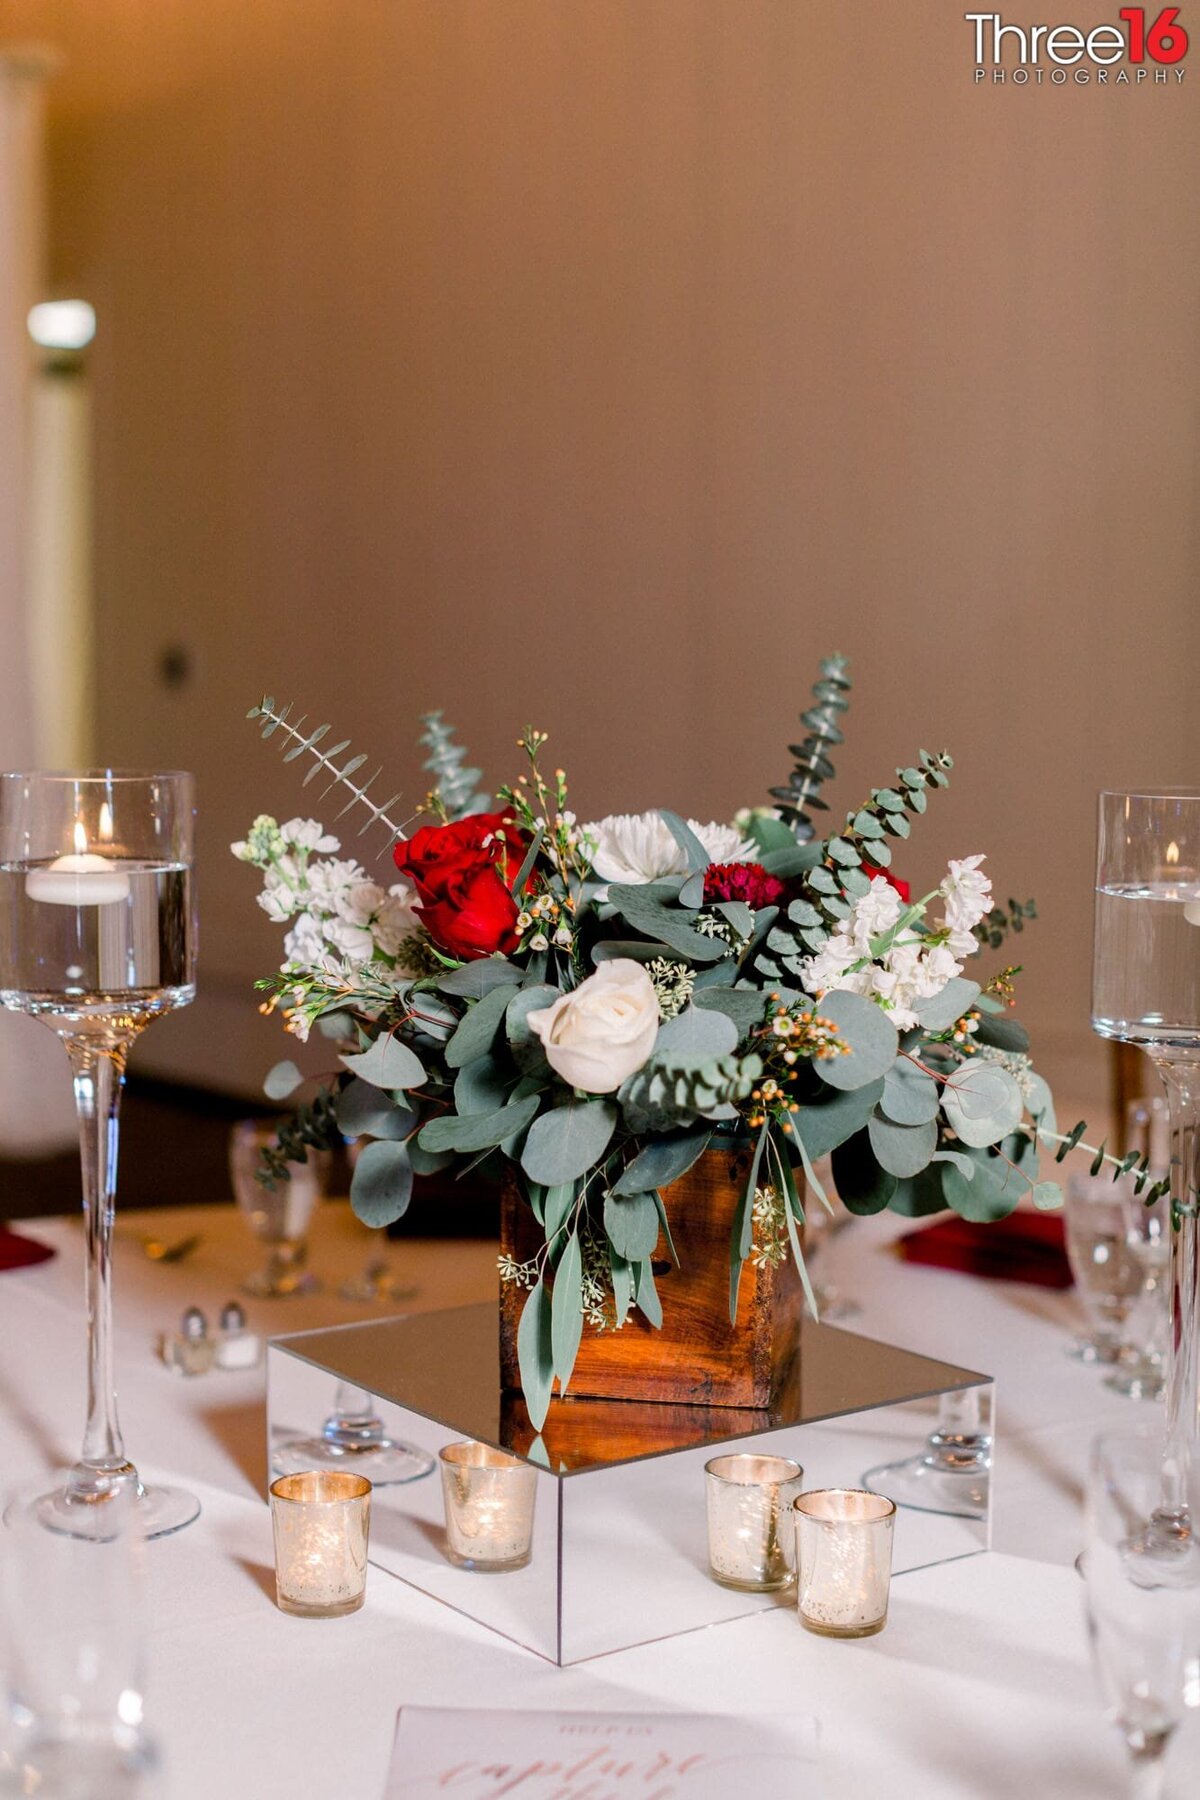 Table layout with centerpiece